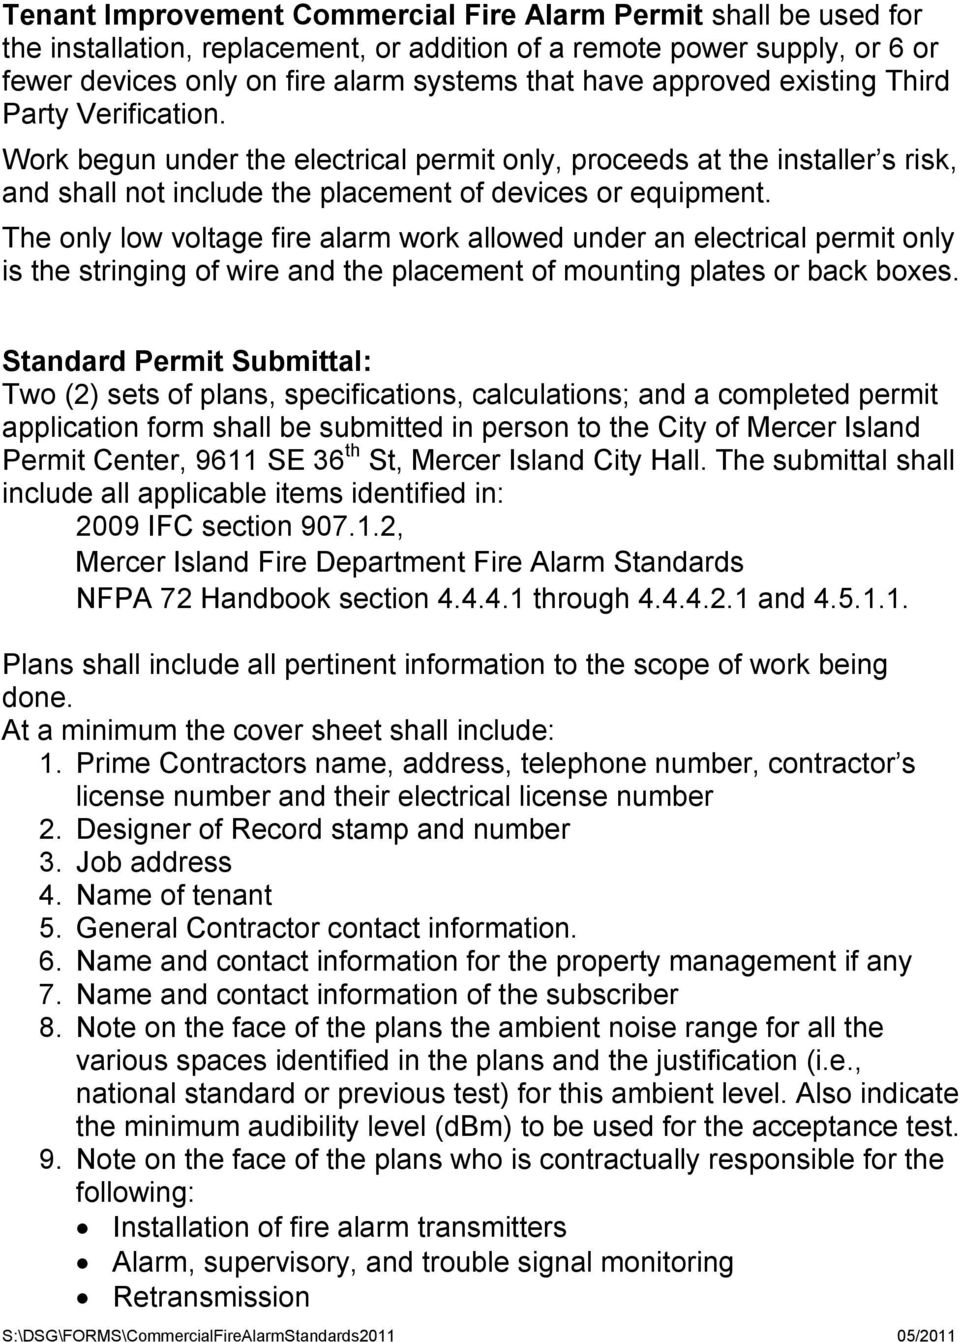 The only low voltage fire alarm work allowed under an electrical permit only is the stringing of wire and the placement of mounting plates or back boxes.